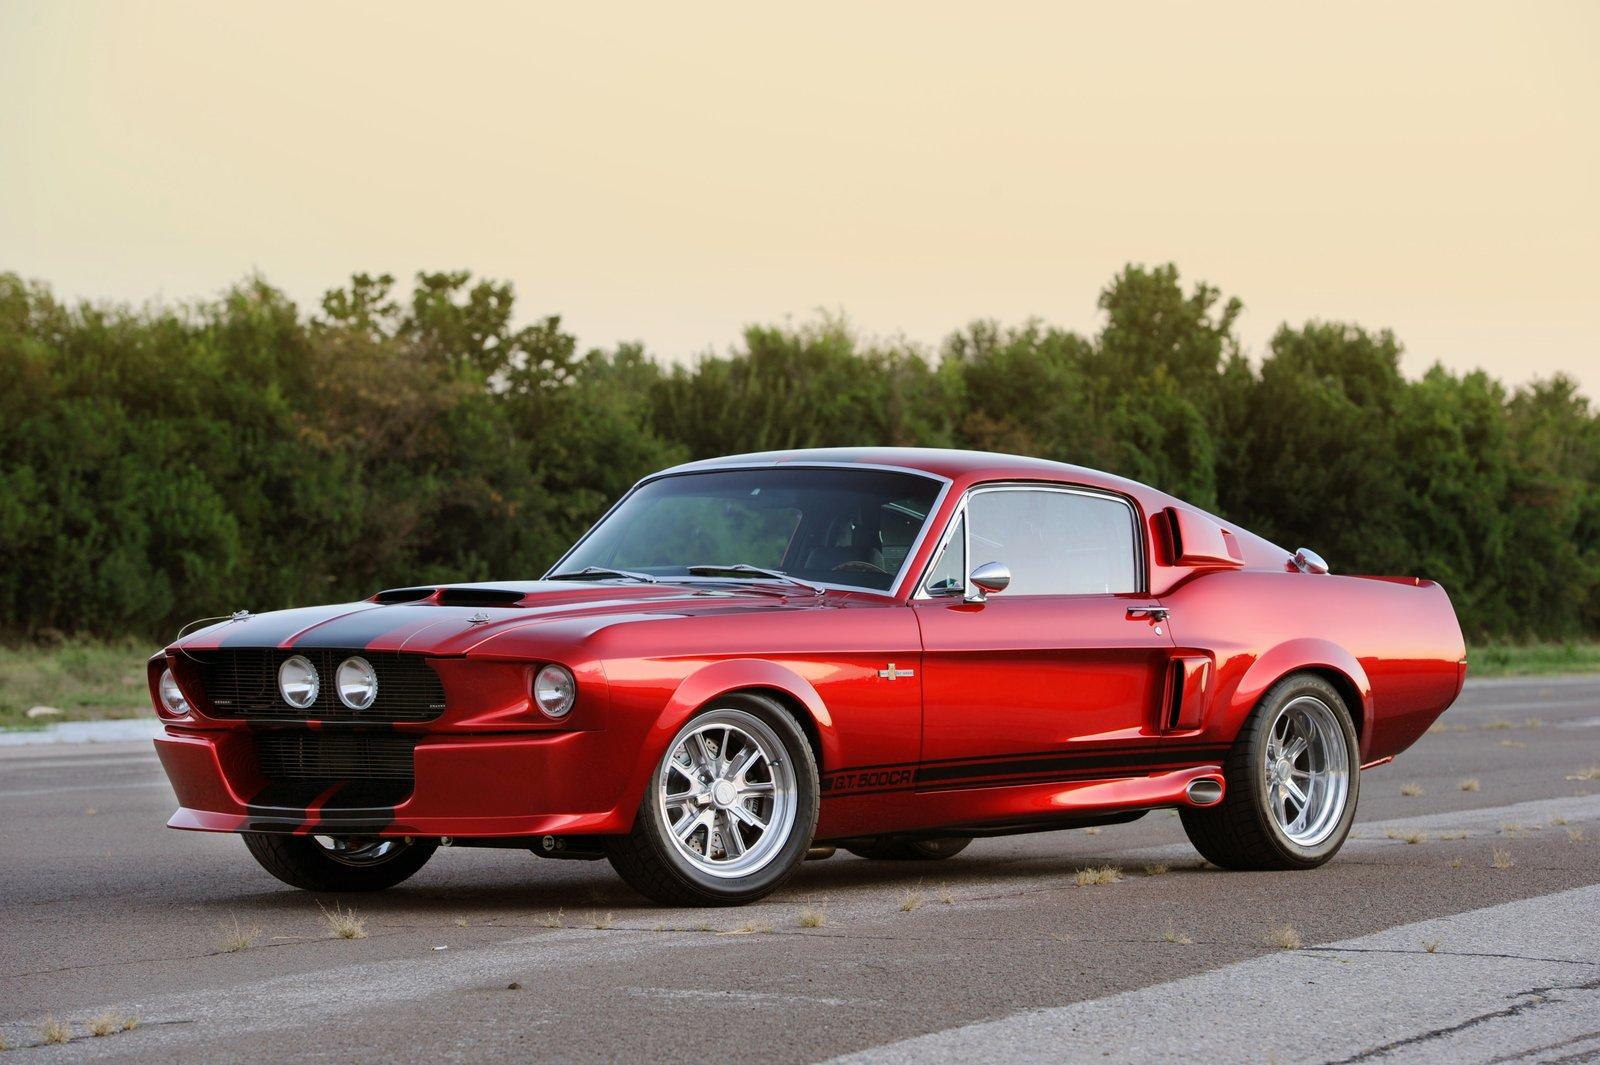 Shelby Gt500cr By Classic Recreations 1967 Wallpaper - 1967 Ford Mustang Shelby Gt500cr - HD Wallpaper 